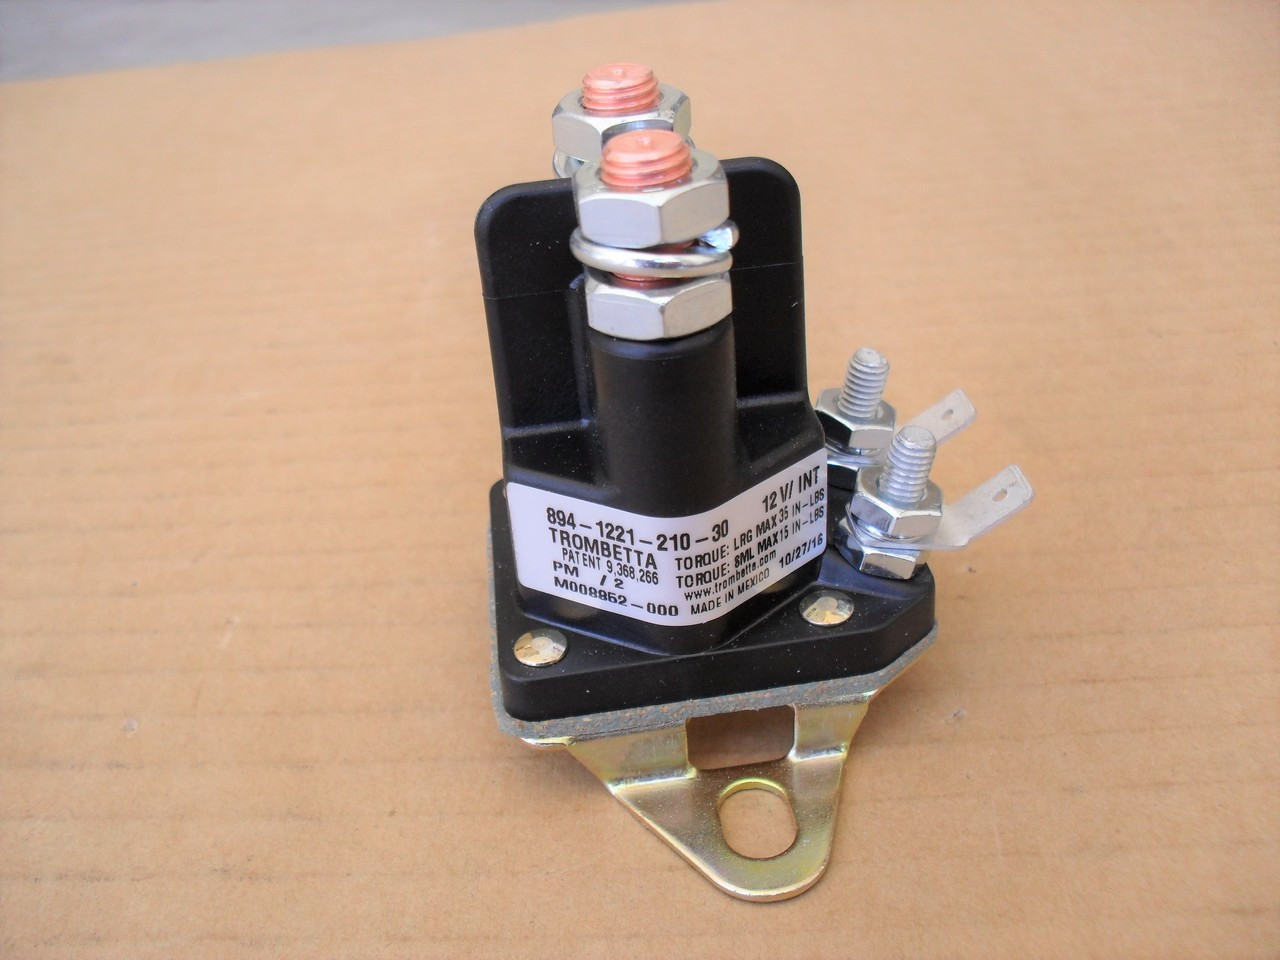 The ROP Shop Starter Solenoid fits Gravely 1232-G 1238-G 1232-H 1238-H 22-H 24-G 30-H Mowers